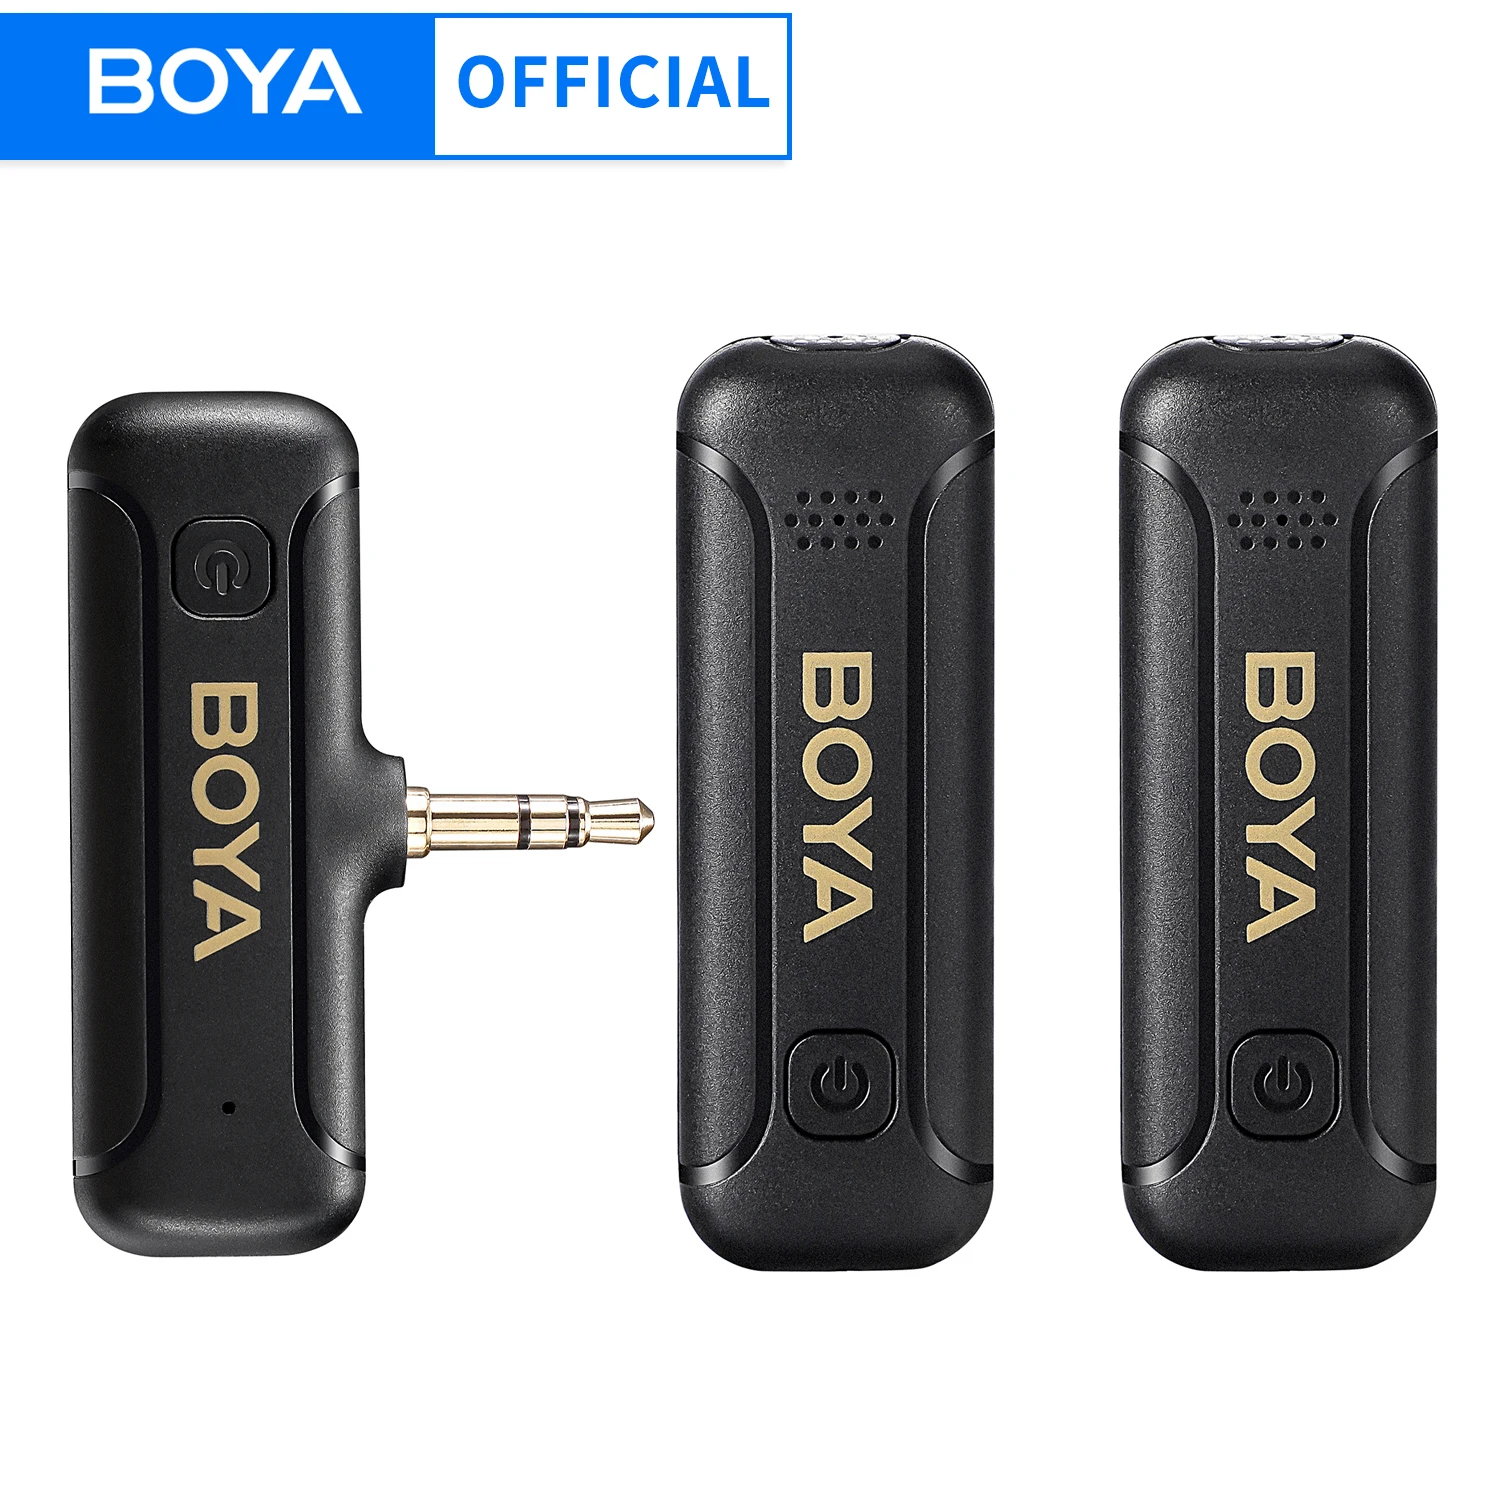 BOYA BY-WM3T2 New Wireless 3.5mm TRS Lavalier Lapel Noise Reduction Microphone for Canon, Nikon, Sony Cameras Vlogging Recording